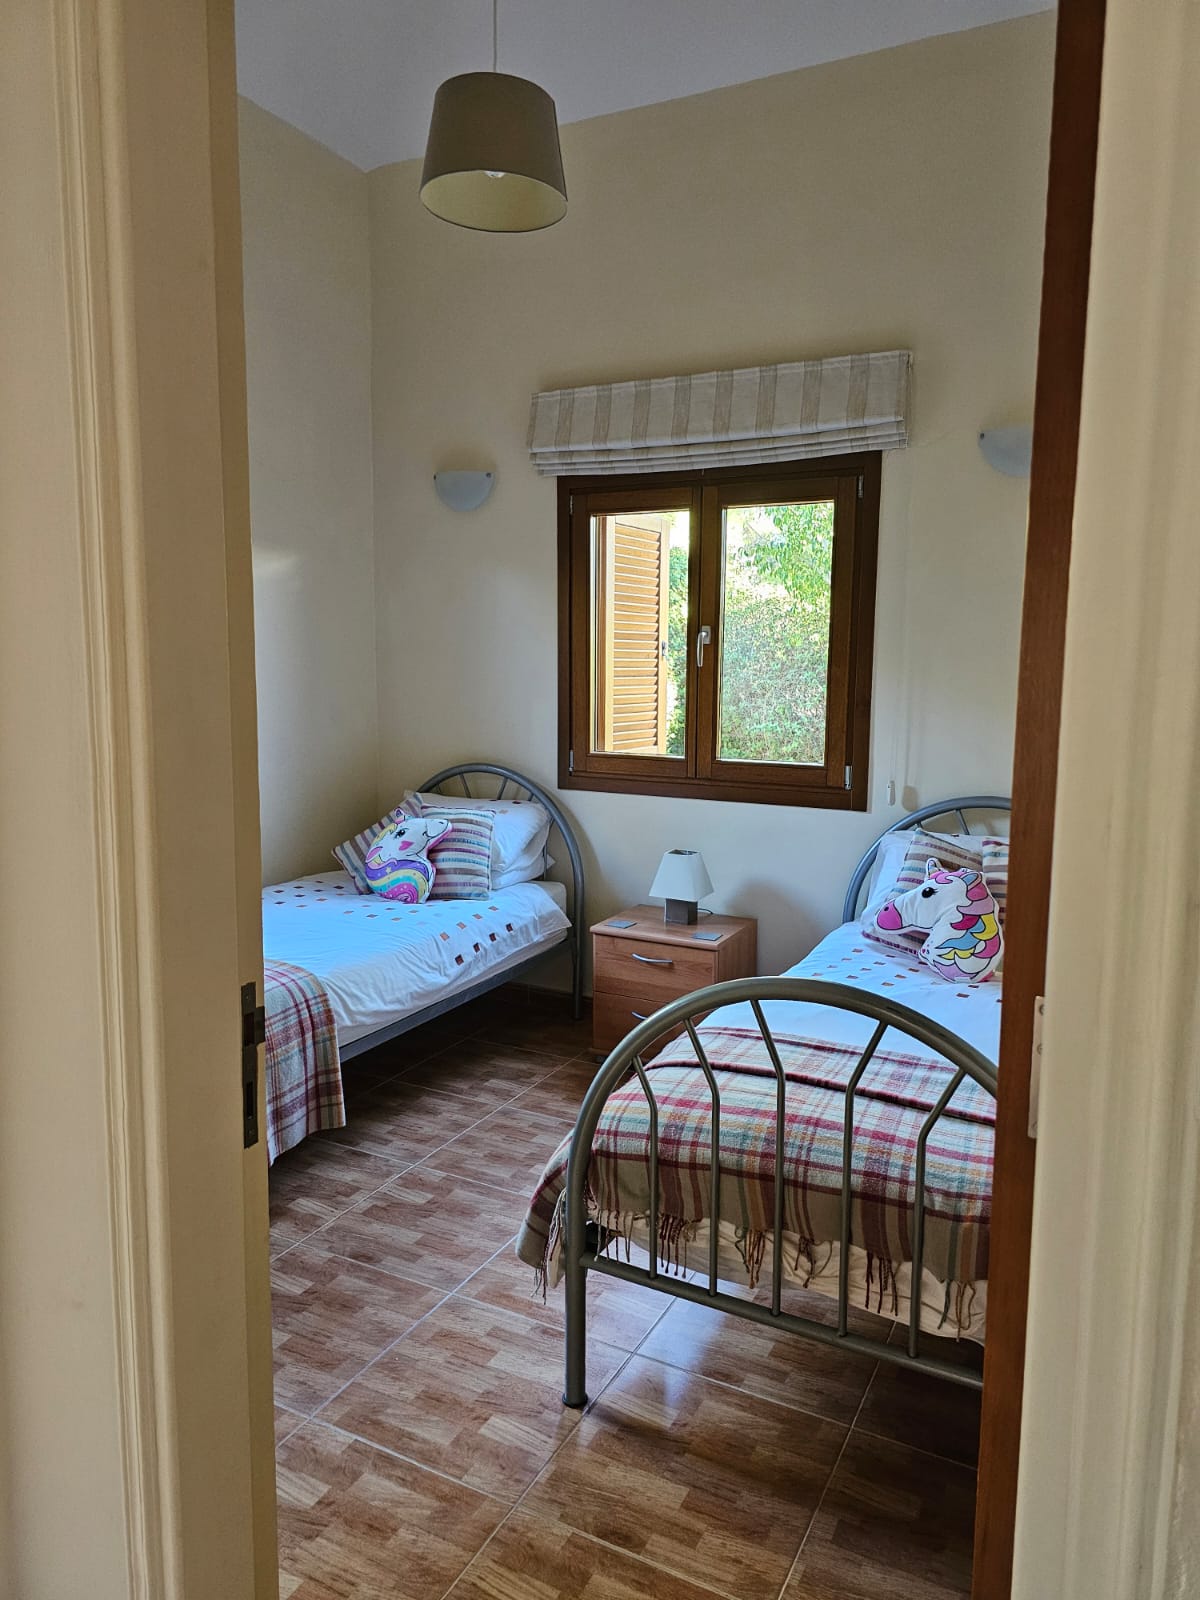 Hauson Realty - Cyprus Real Estate Agents A bedroom with two beds and a window.